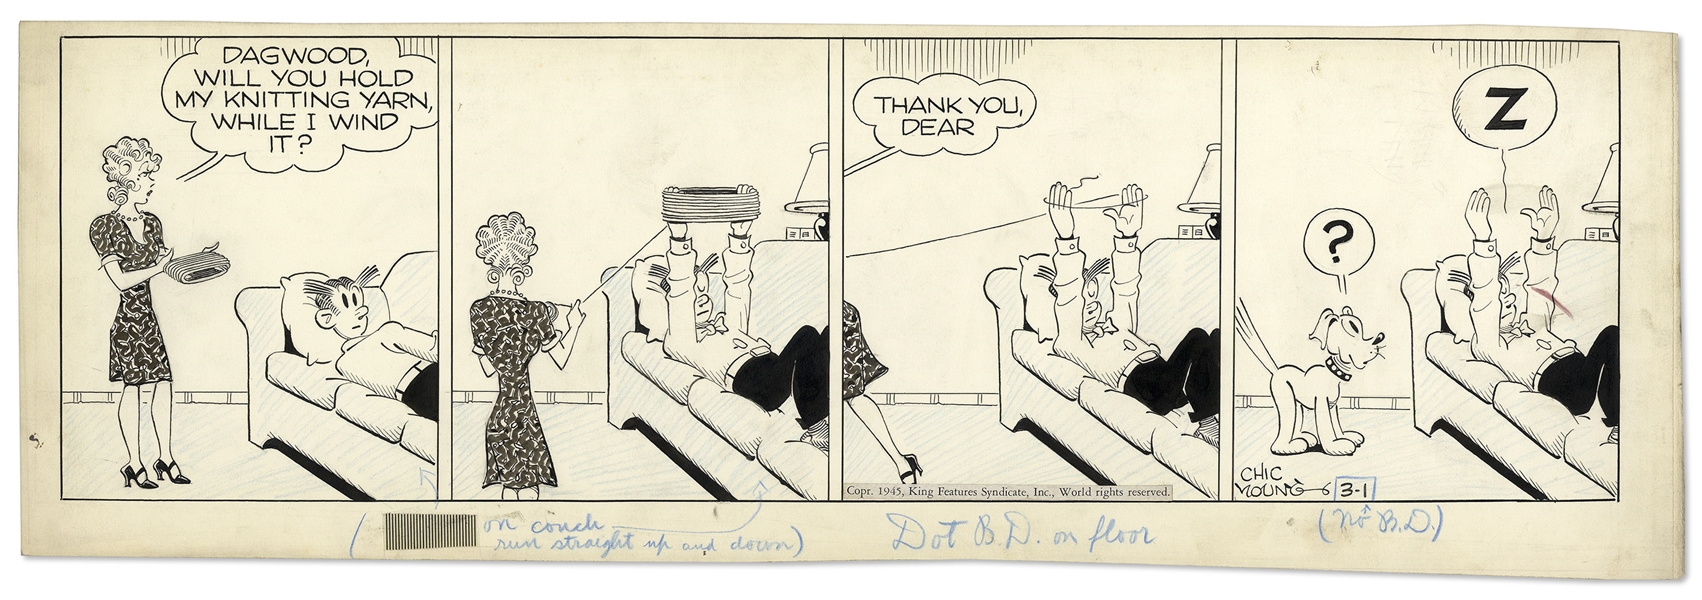 Chic Young Hand-Drawn ''Blondie'' Comic Strip From 1945 Titled ''Hands Up!''